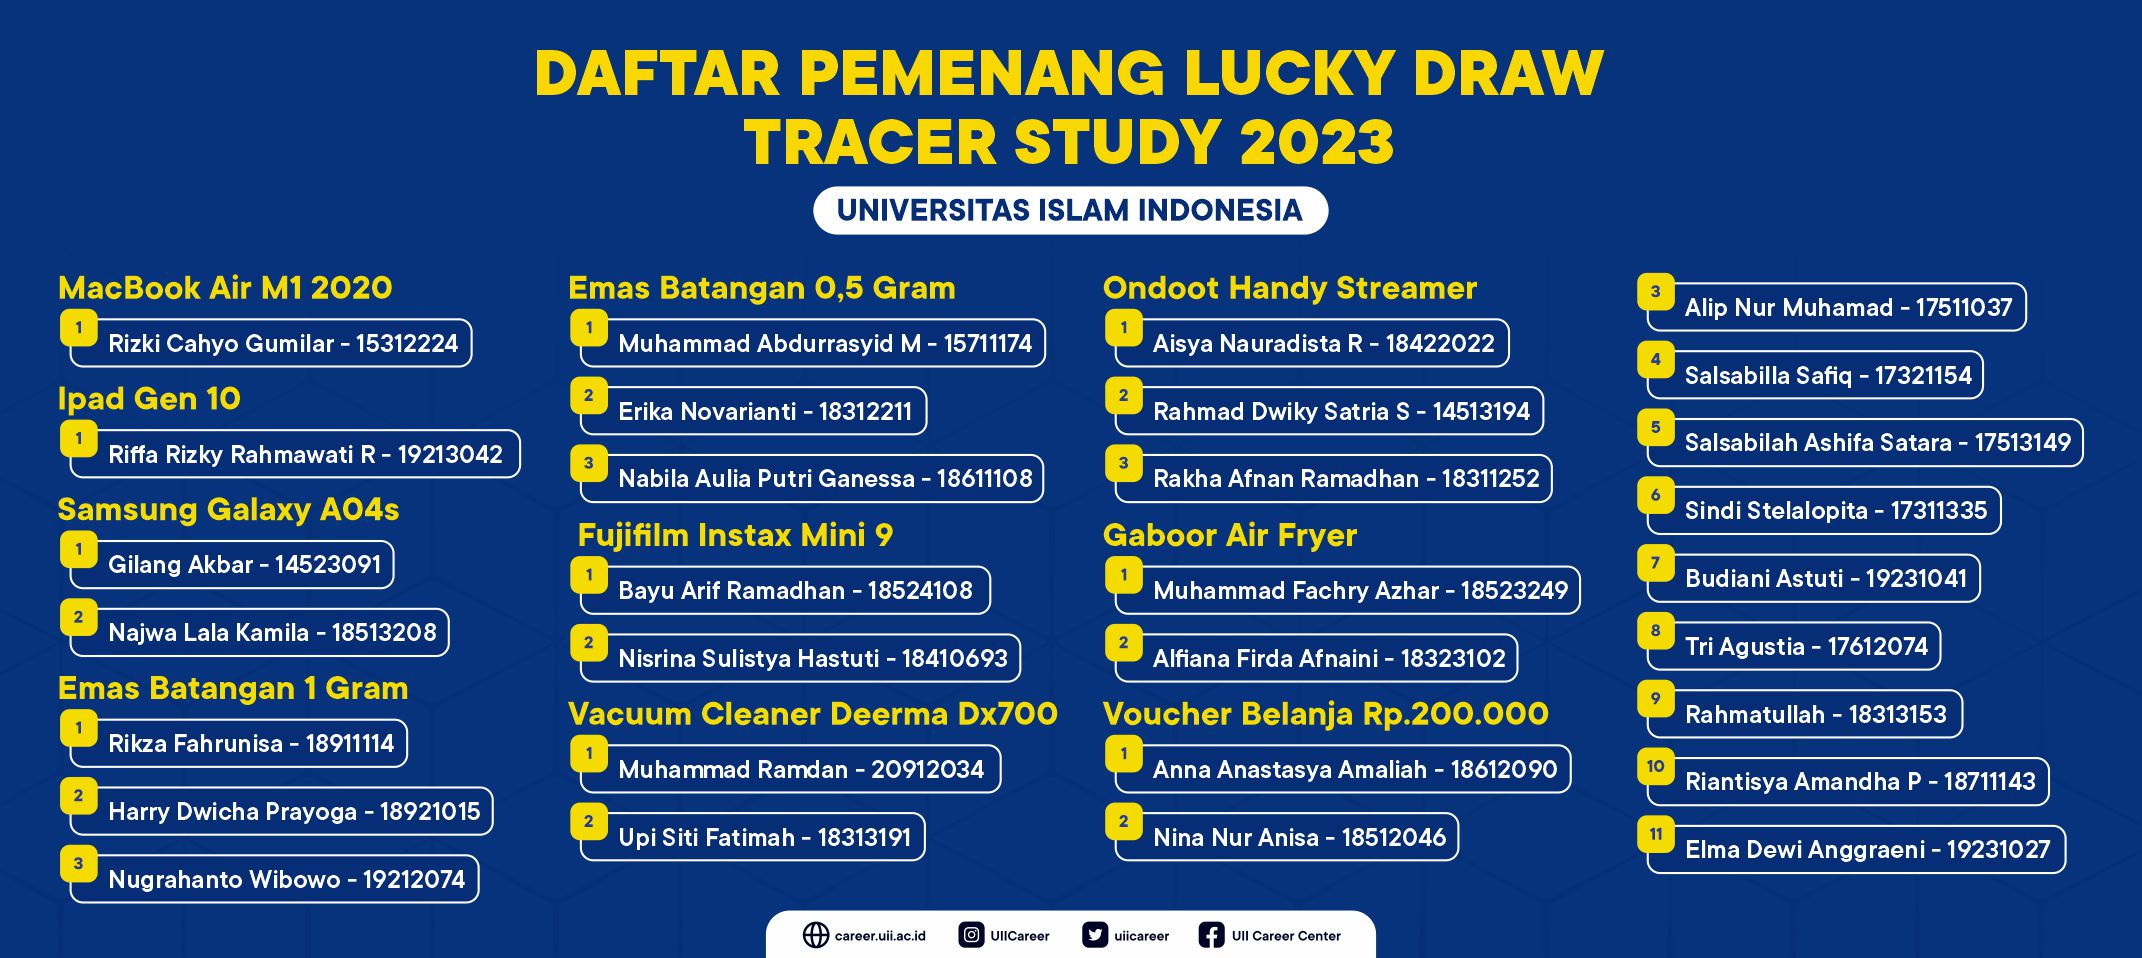 Pemenang Lucky Draw Tracer Study 2023